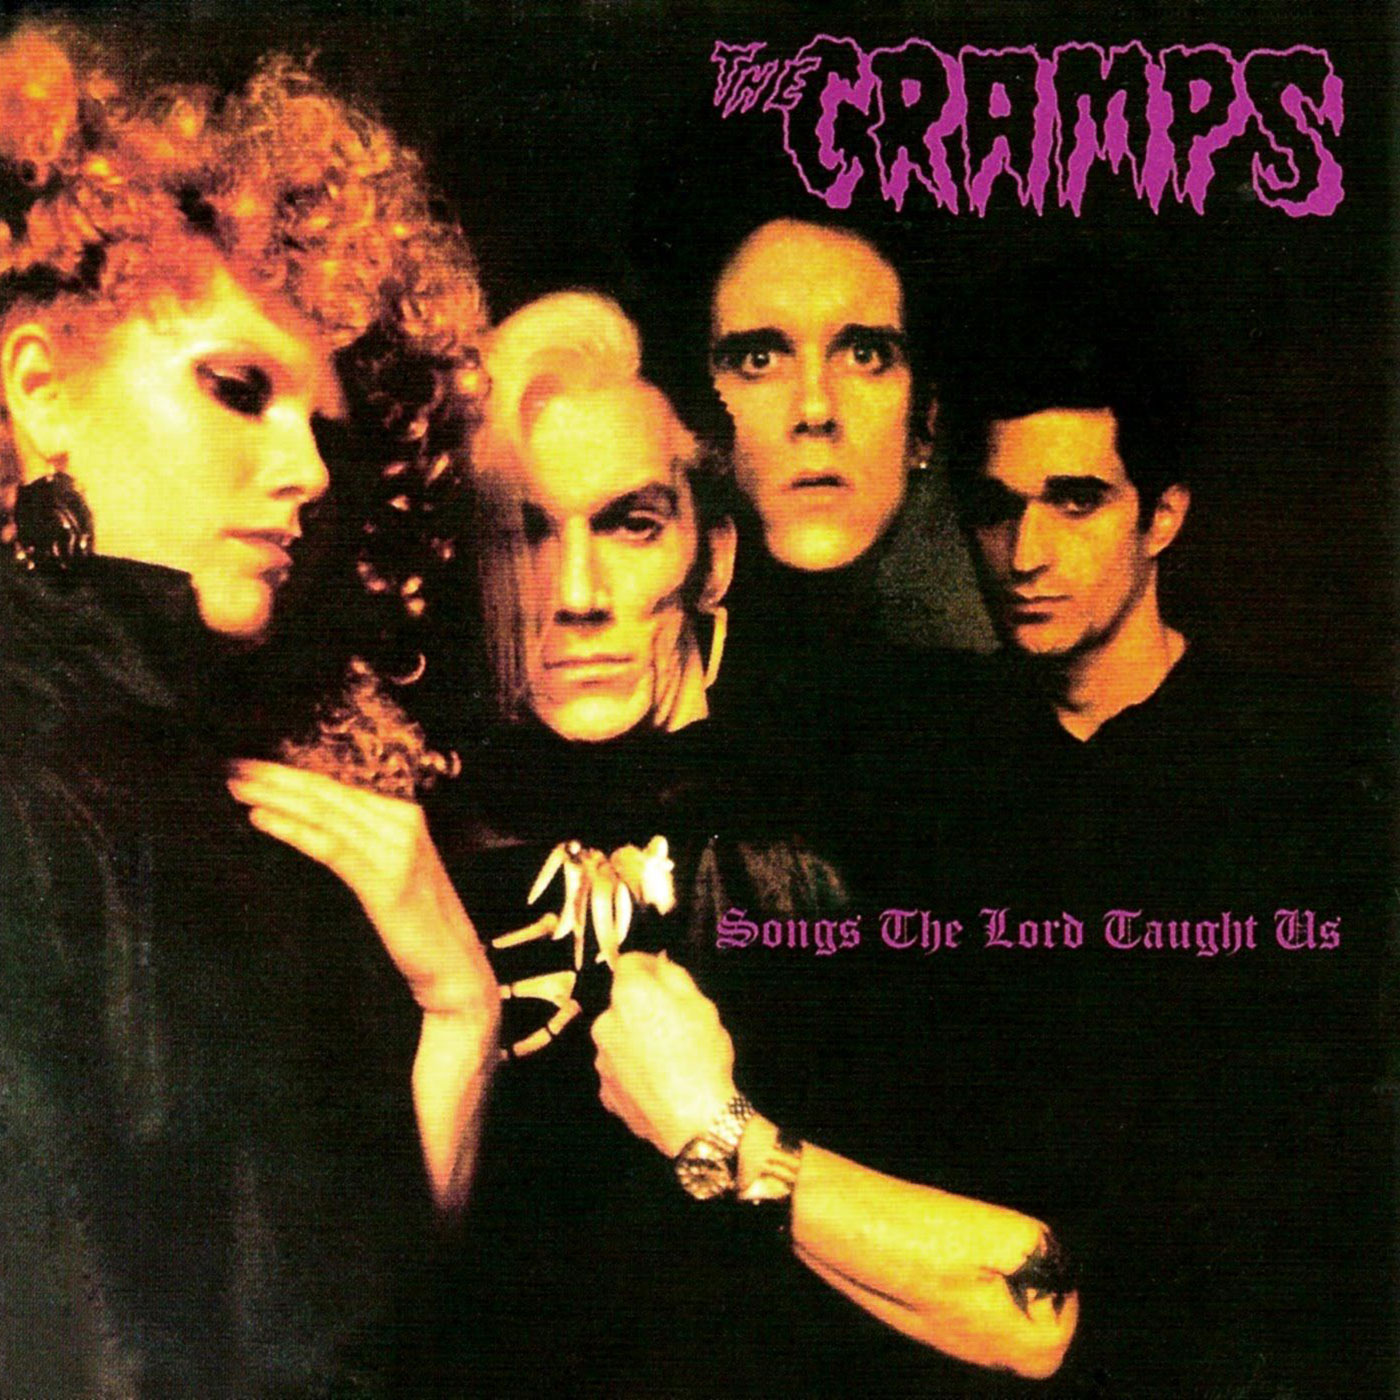 457 The Cramps – The Songs the Lord Taught Us